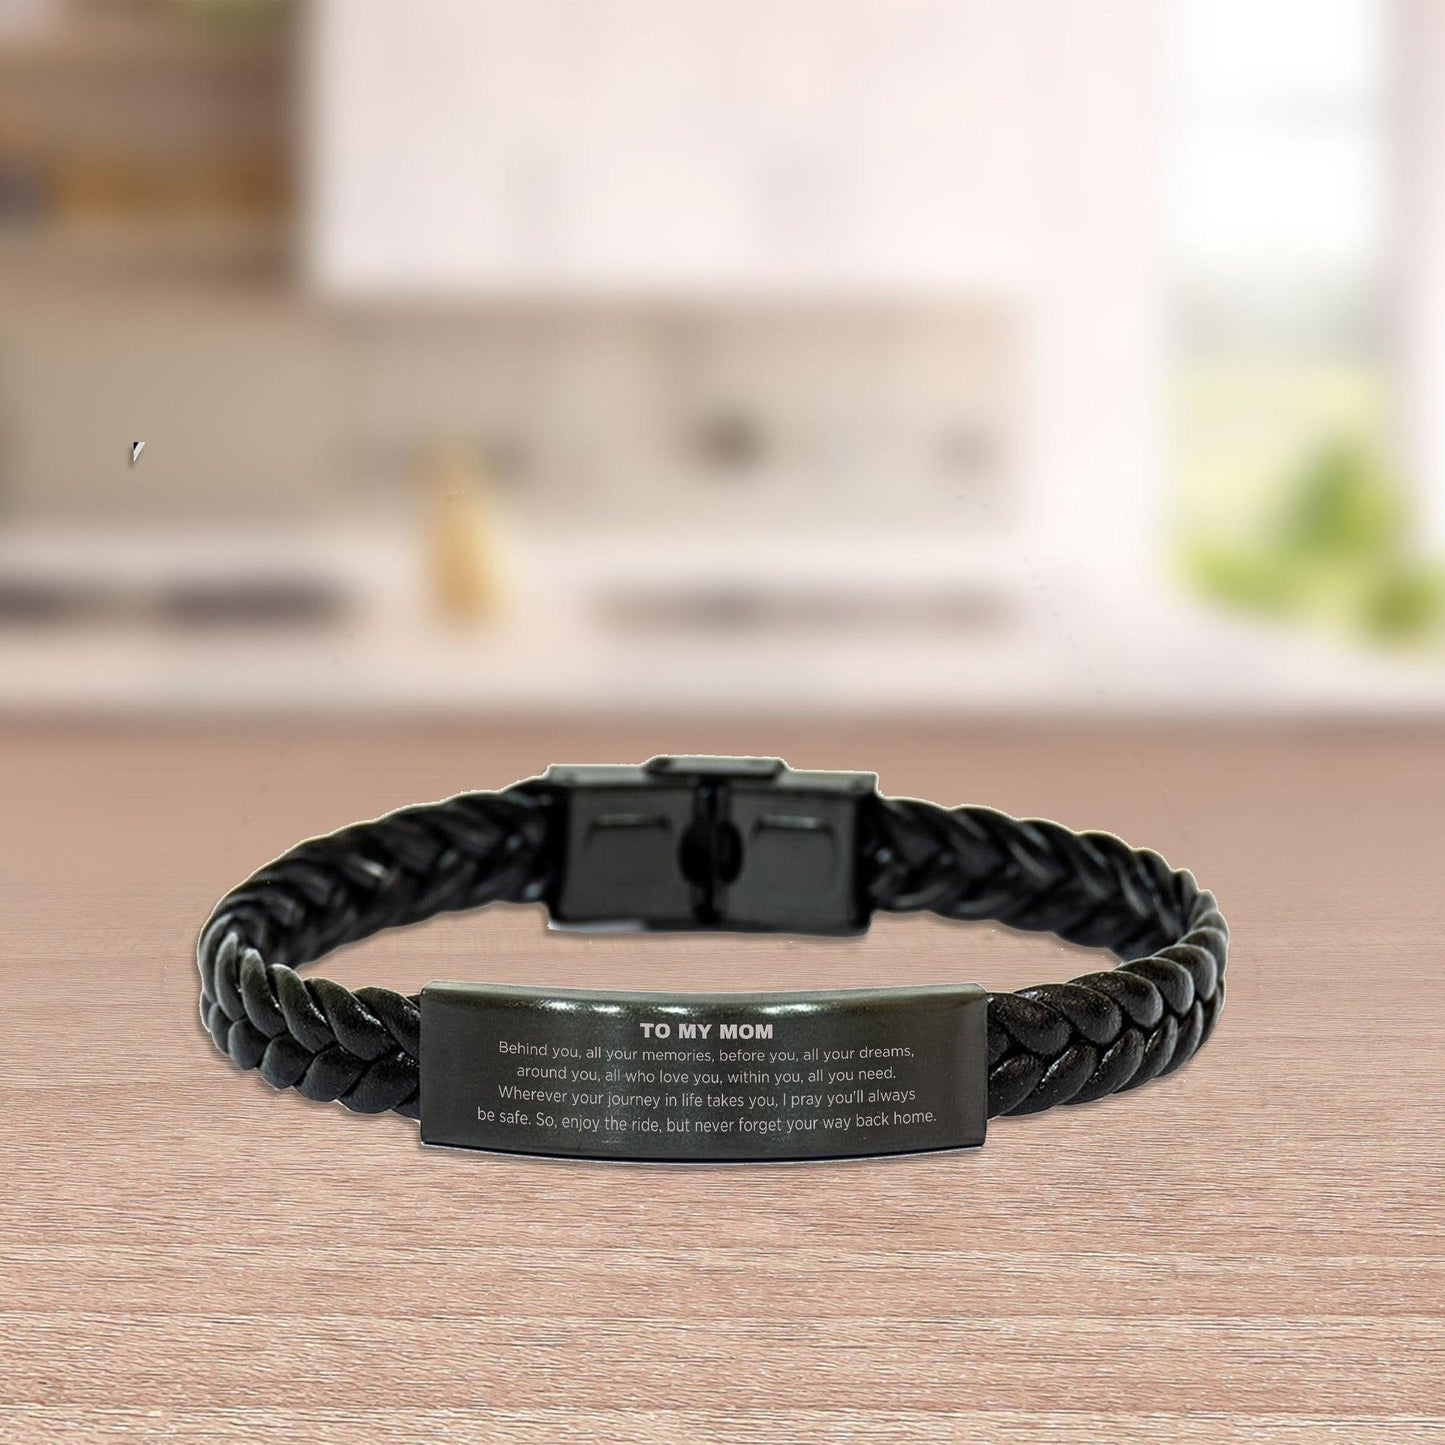 To My Mom Gifts, Inspirational Mom Braided Leather Bracelet, Sentimental Birthday Christmas Unique Gifts For Mom Behind you, all your memories, before you, all your dreams, around you, all who love you, within you, all you need - Mallard Moon Gift Shop